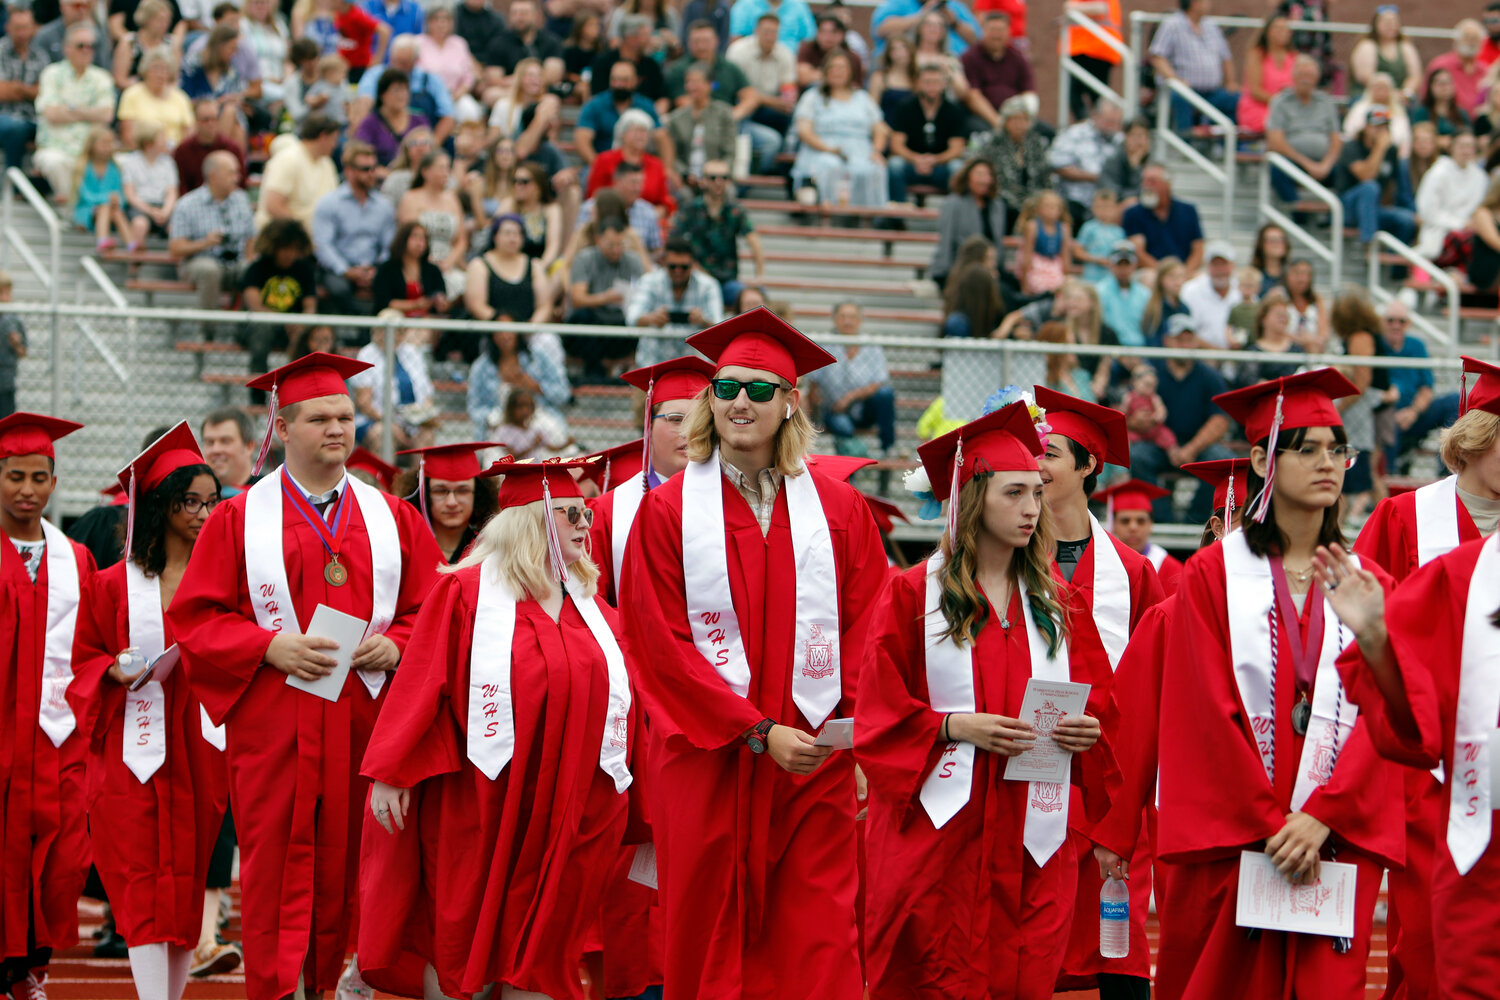 Warrenton High School graduates process in during the start of the June 10 commencement ceremony.